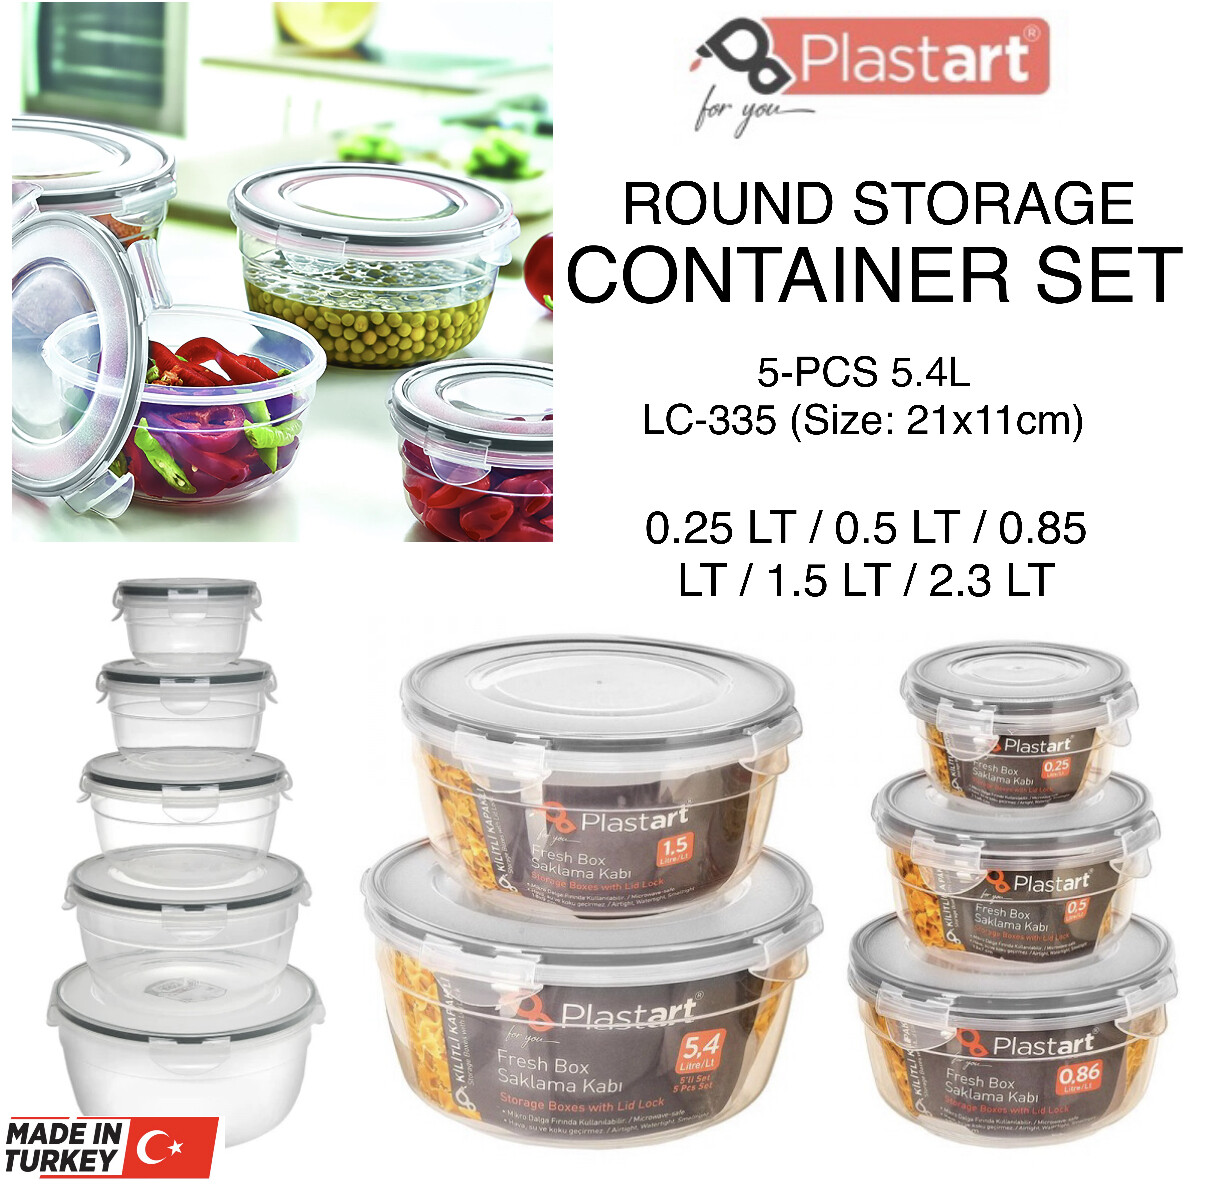 5-Pcs Round Containers (LC-335)